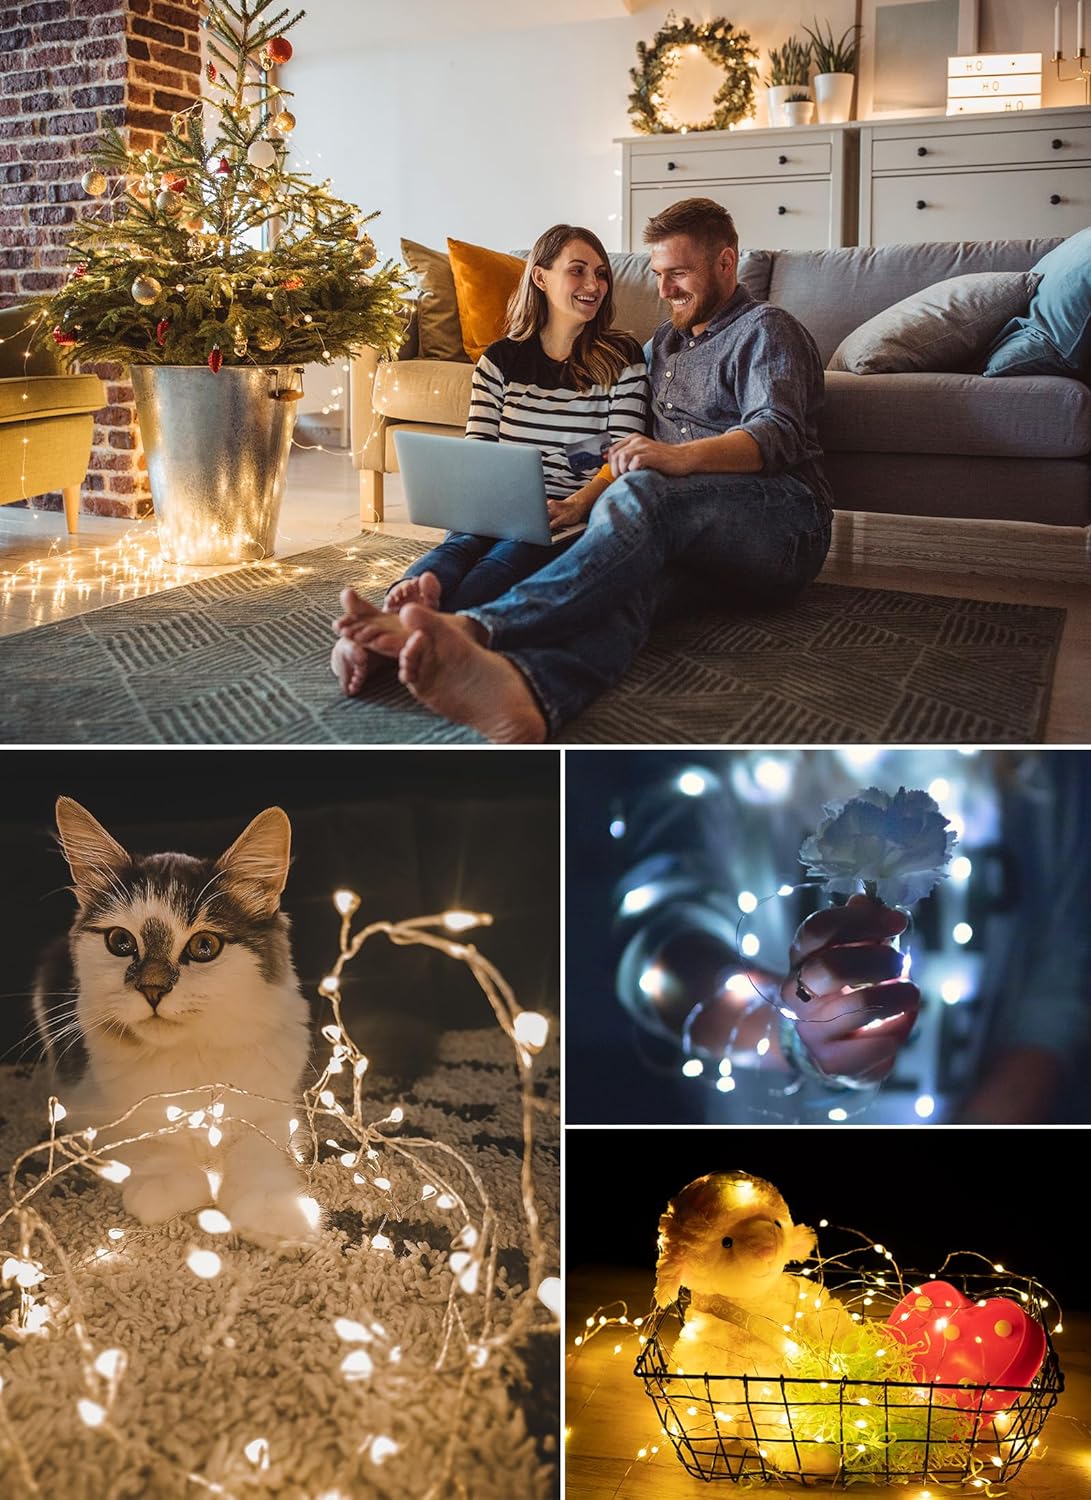 Minetom Fairy Lights Color Changing - 33 FT 100 LED String Lights with Remote, 11 Modes USB Powered Valentines Lights Indoor, Waterproof Twinkle Lights for Bedroom Classroom Easter St. Patrick Party